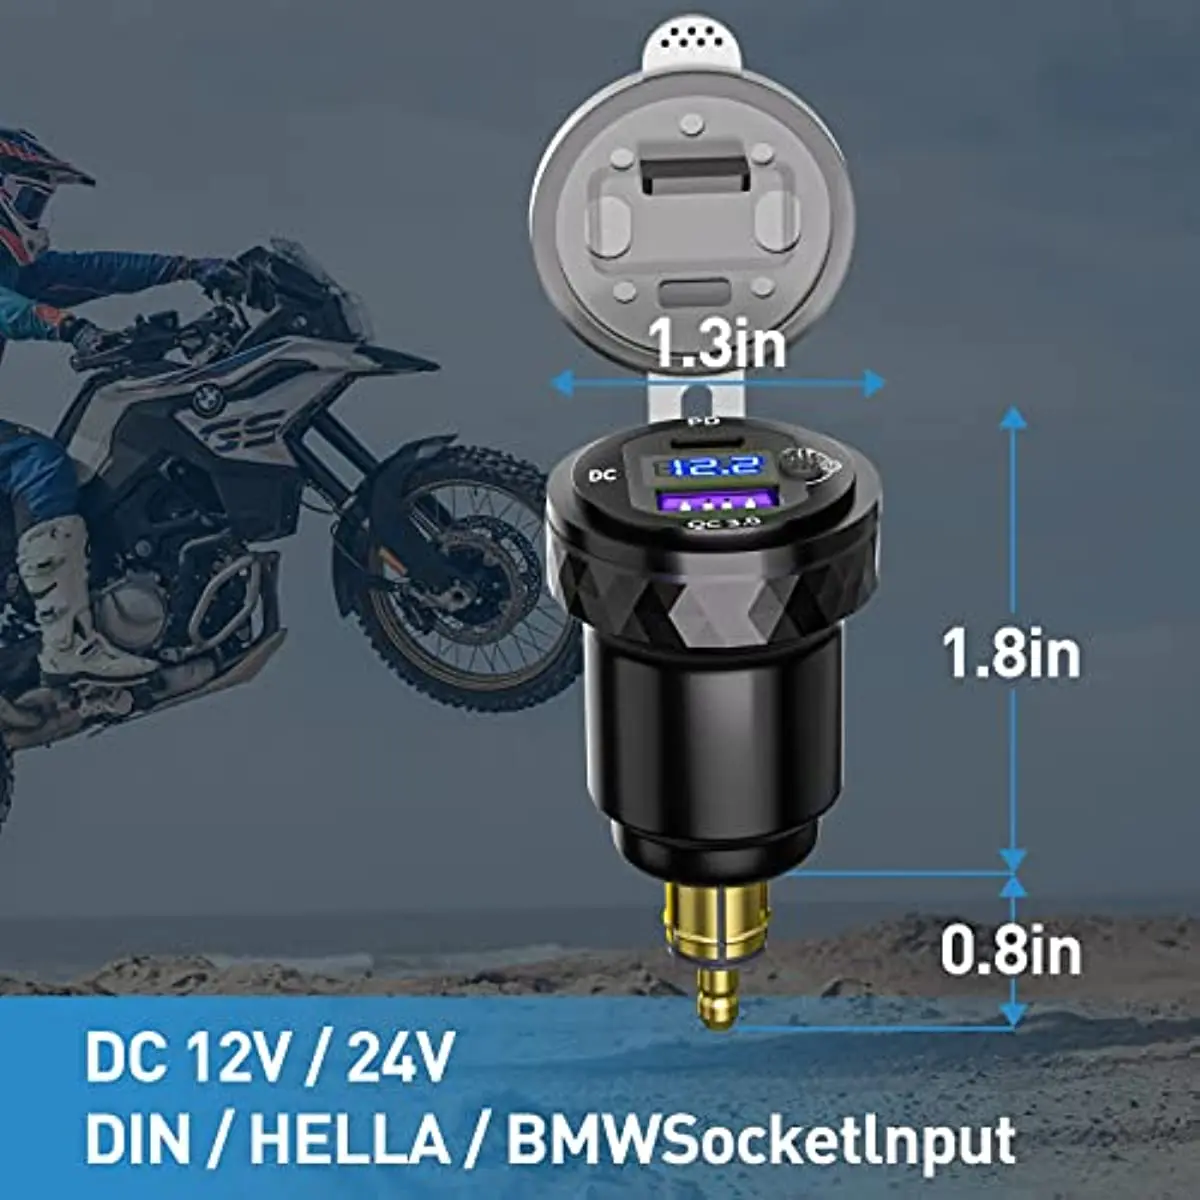 DIN Hella Plug to USB C PD 3.0 QC 3.0 USB Charger Power Adapter Voltmeter  with ON-Off Switch for BMW Ducati Triumph Motorcycle AliExpress